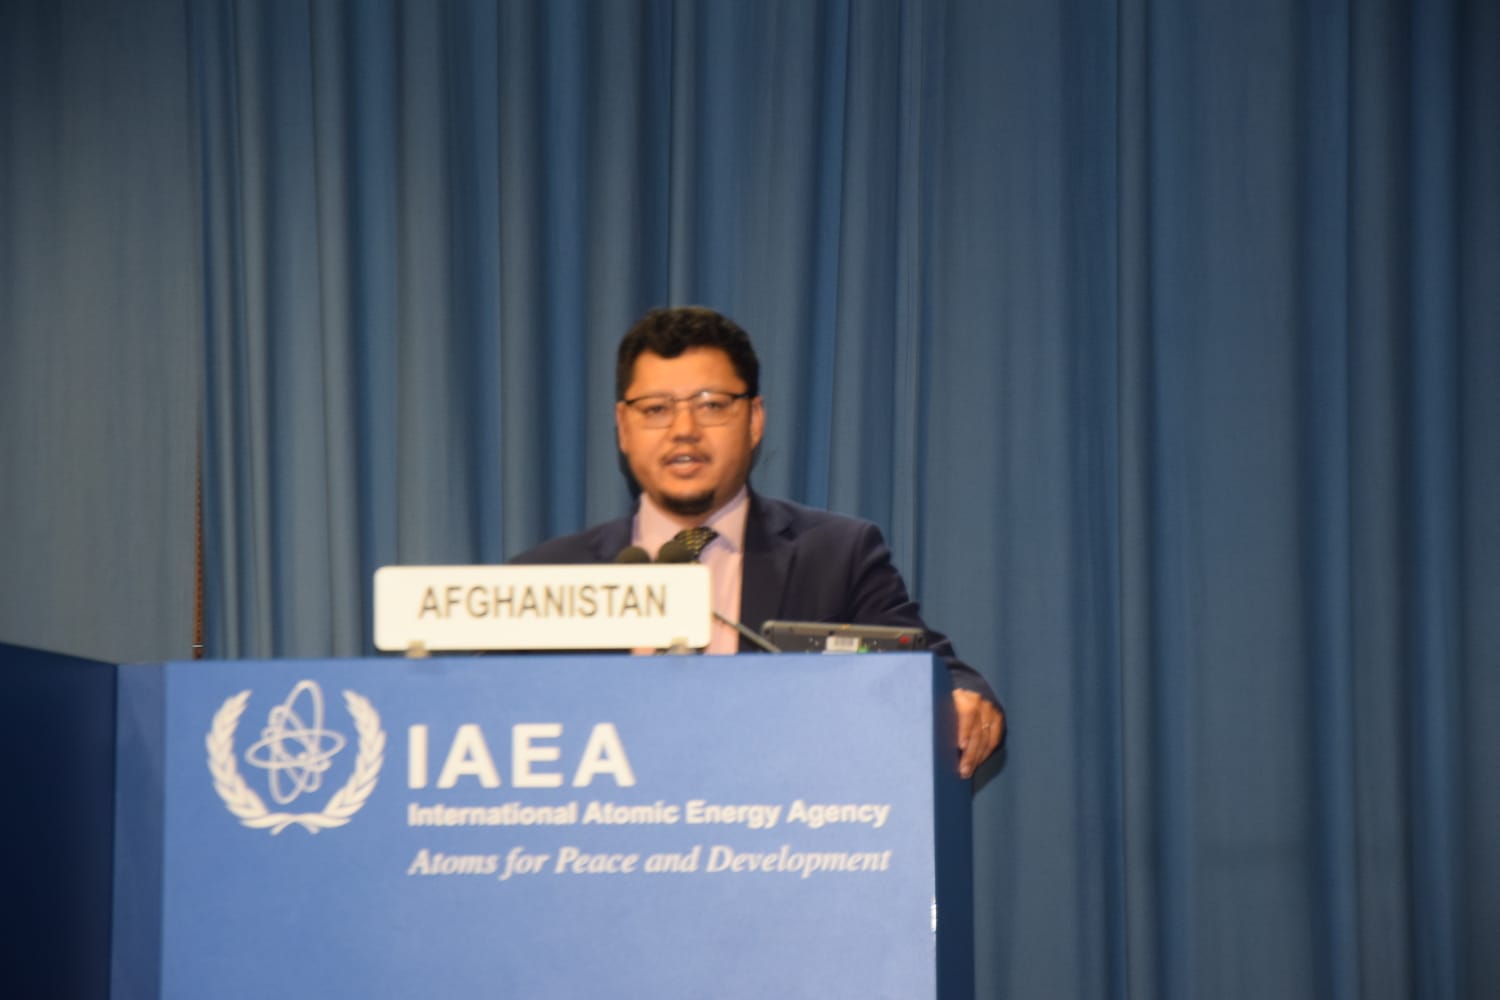 Afghanistan Statement in IAEA General Conference by Dr.Tahir Shaaran